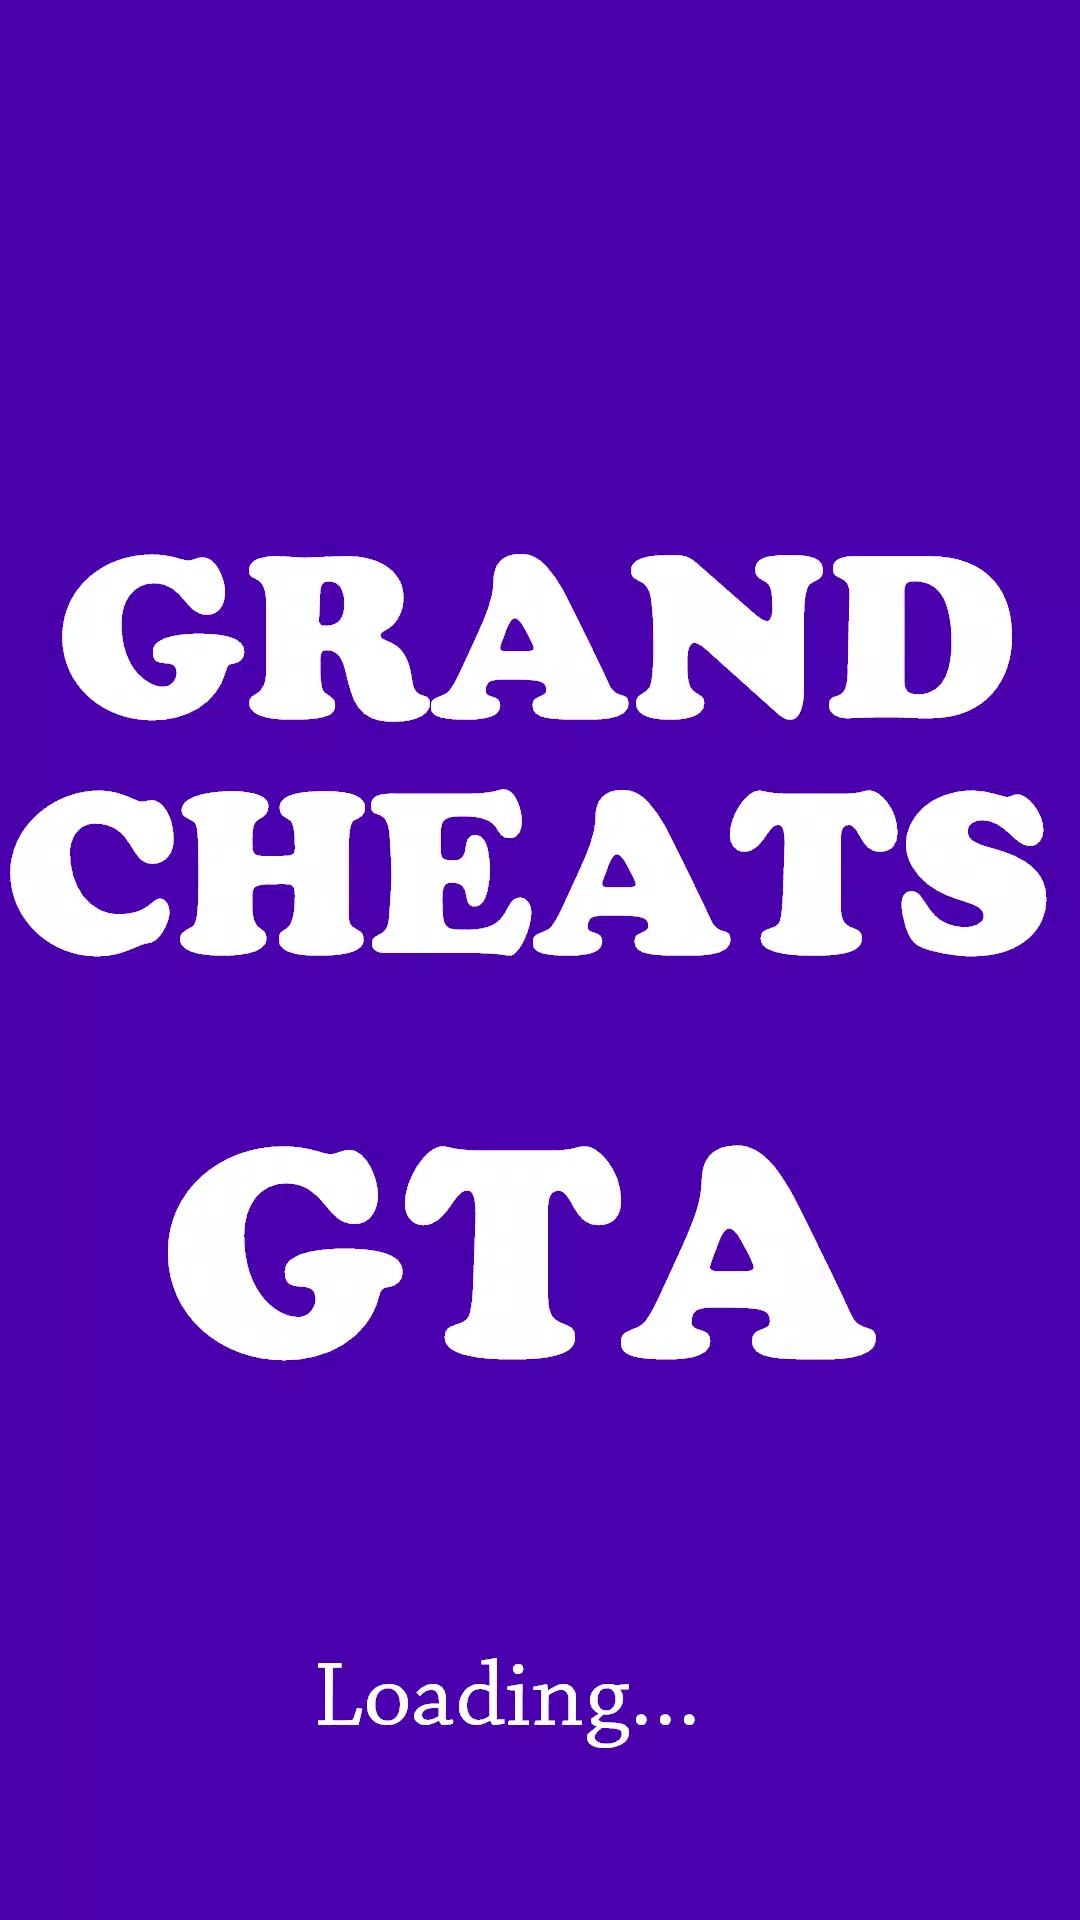 Cheats For GTA 5 Xbox -One 360 APK pour Android Télécharger